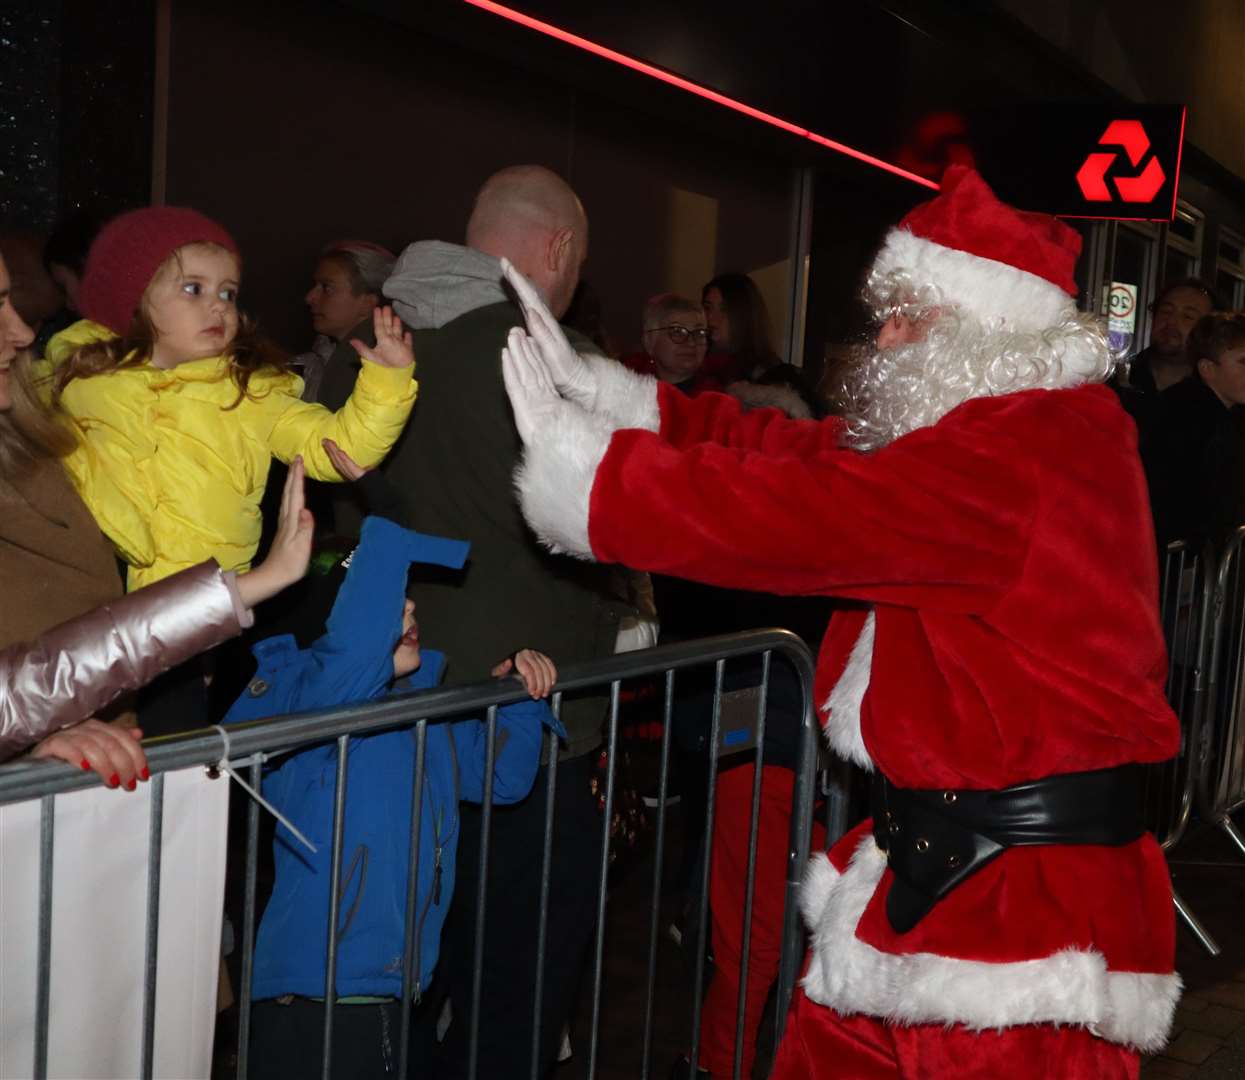 Santa high-fiving the crowd at the Sittingbourne Christmas lights switch-on